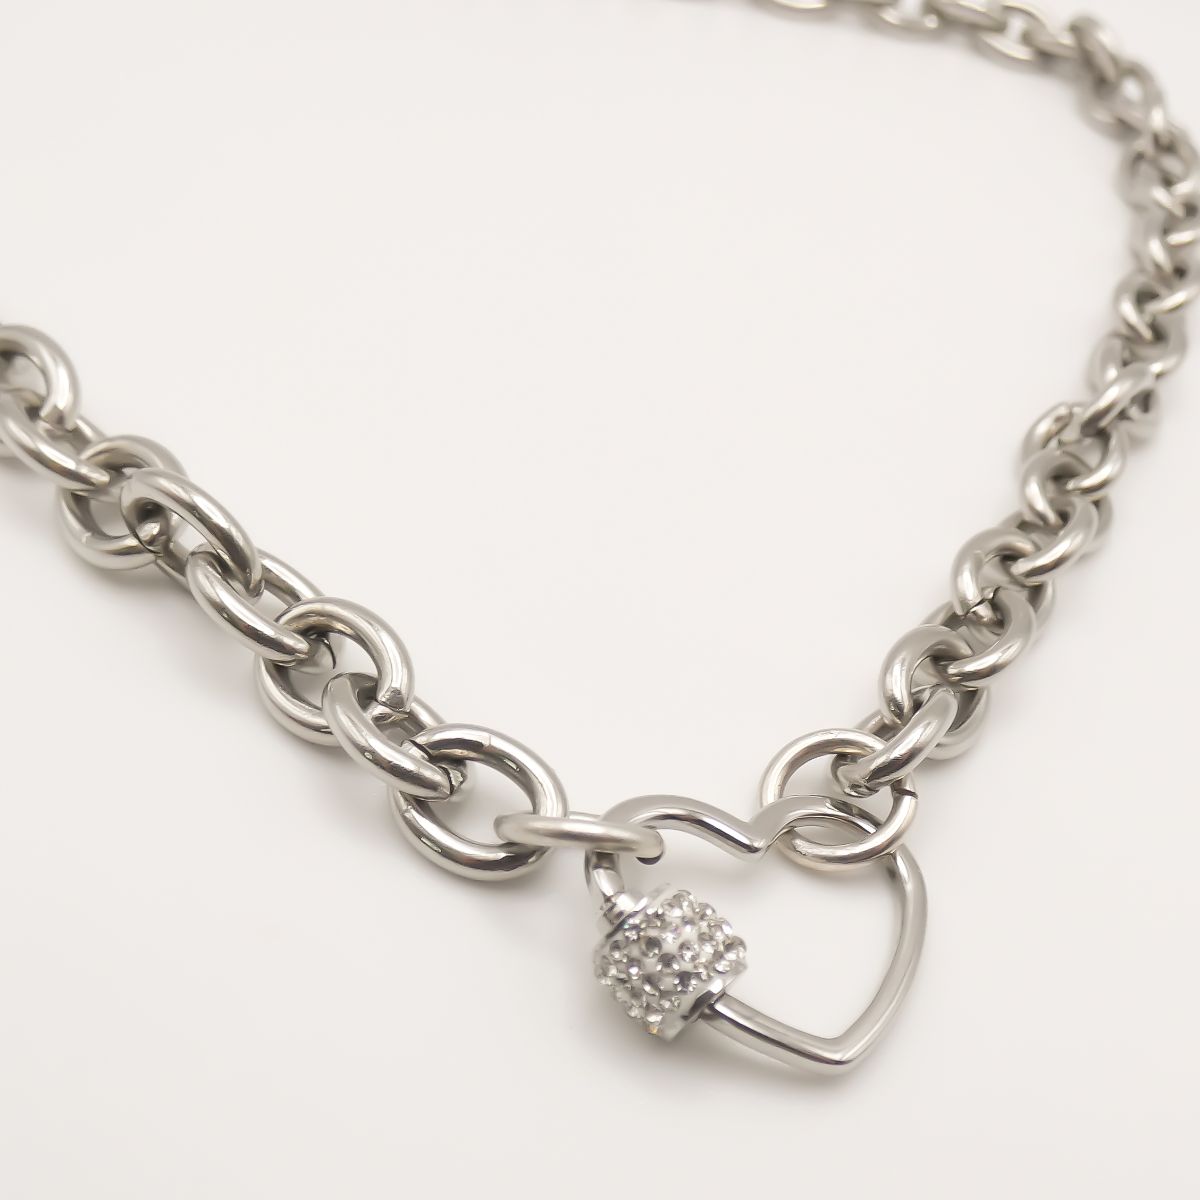 Vintage Chunky Sterling Silver Heart Tag Chain Necklace, Solid Silver |  Good's Vintage | Philadelphia, PA